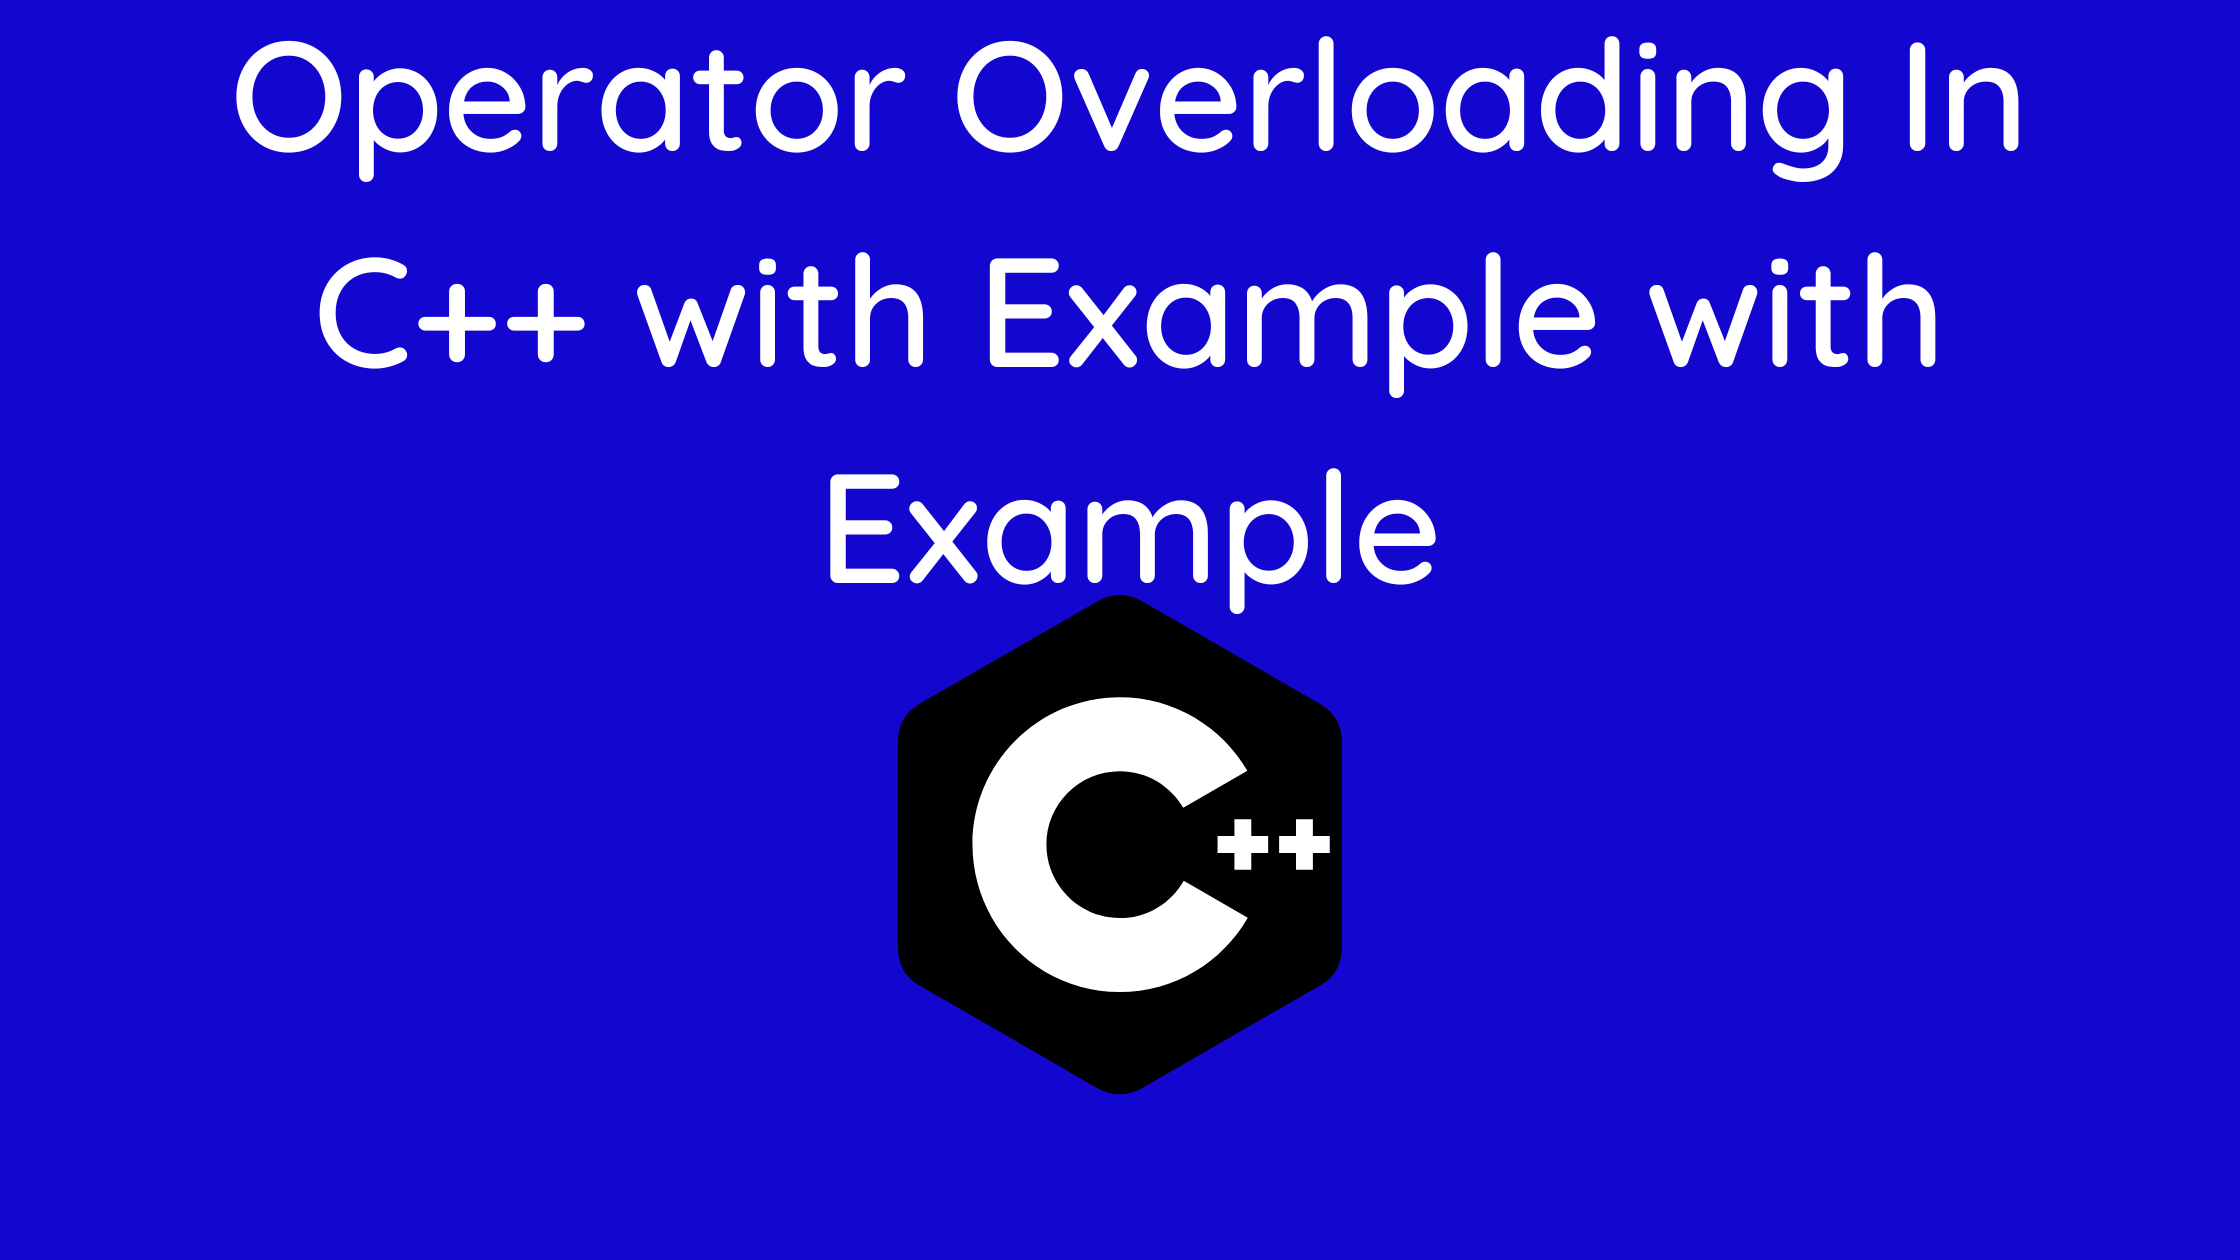 Operator Overloading In C++ with Example